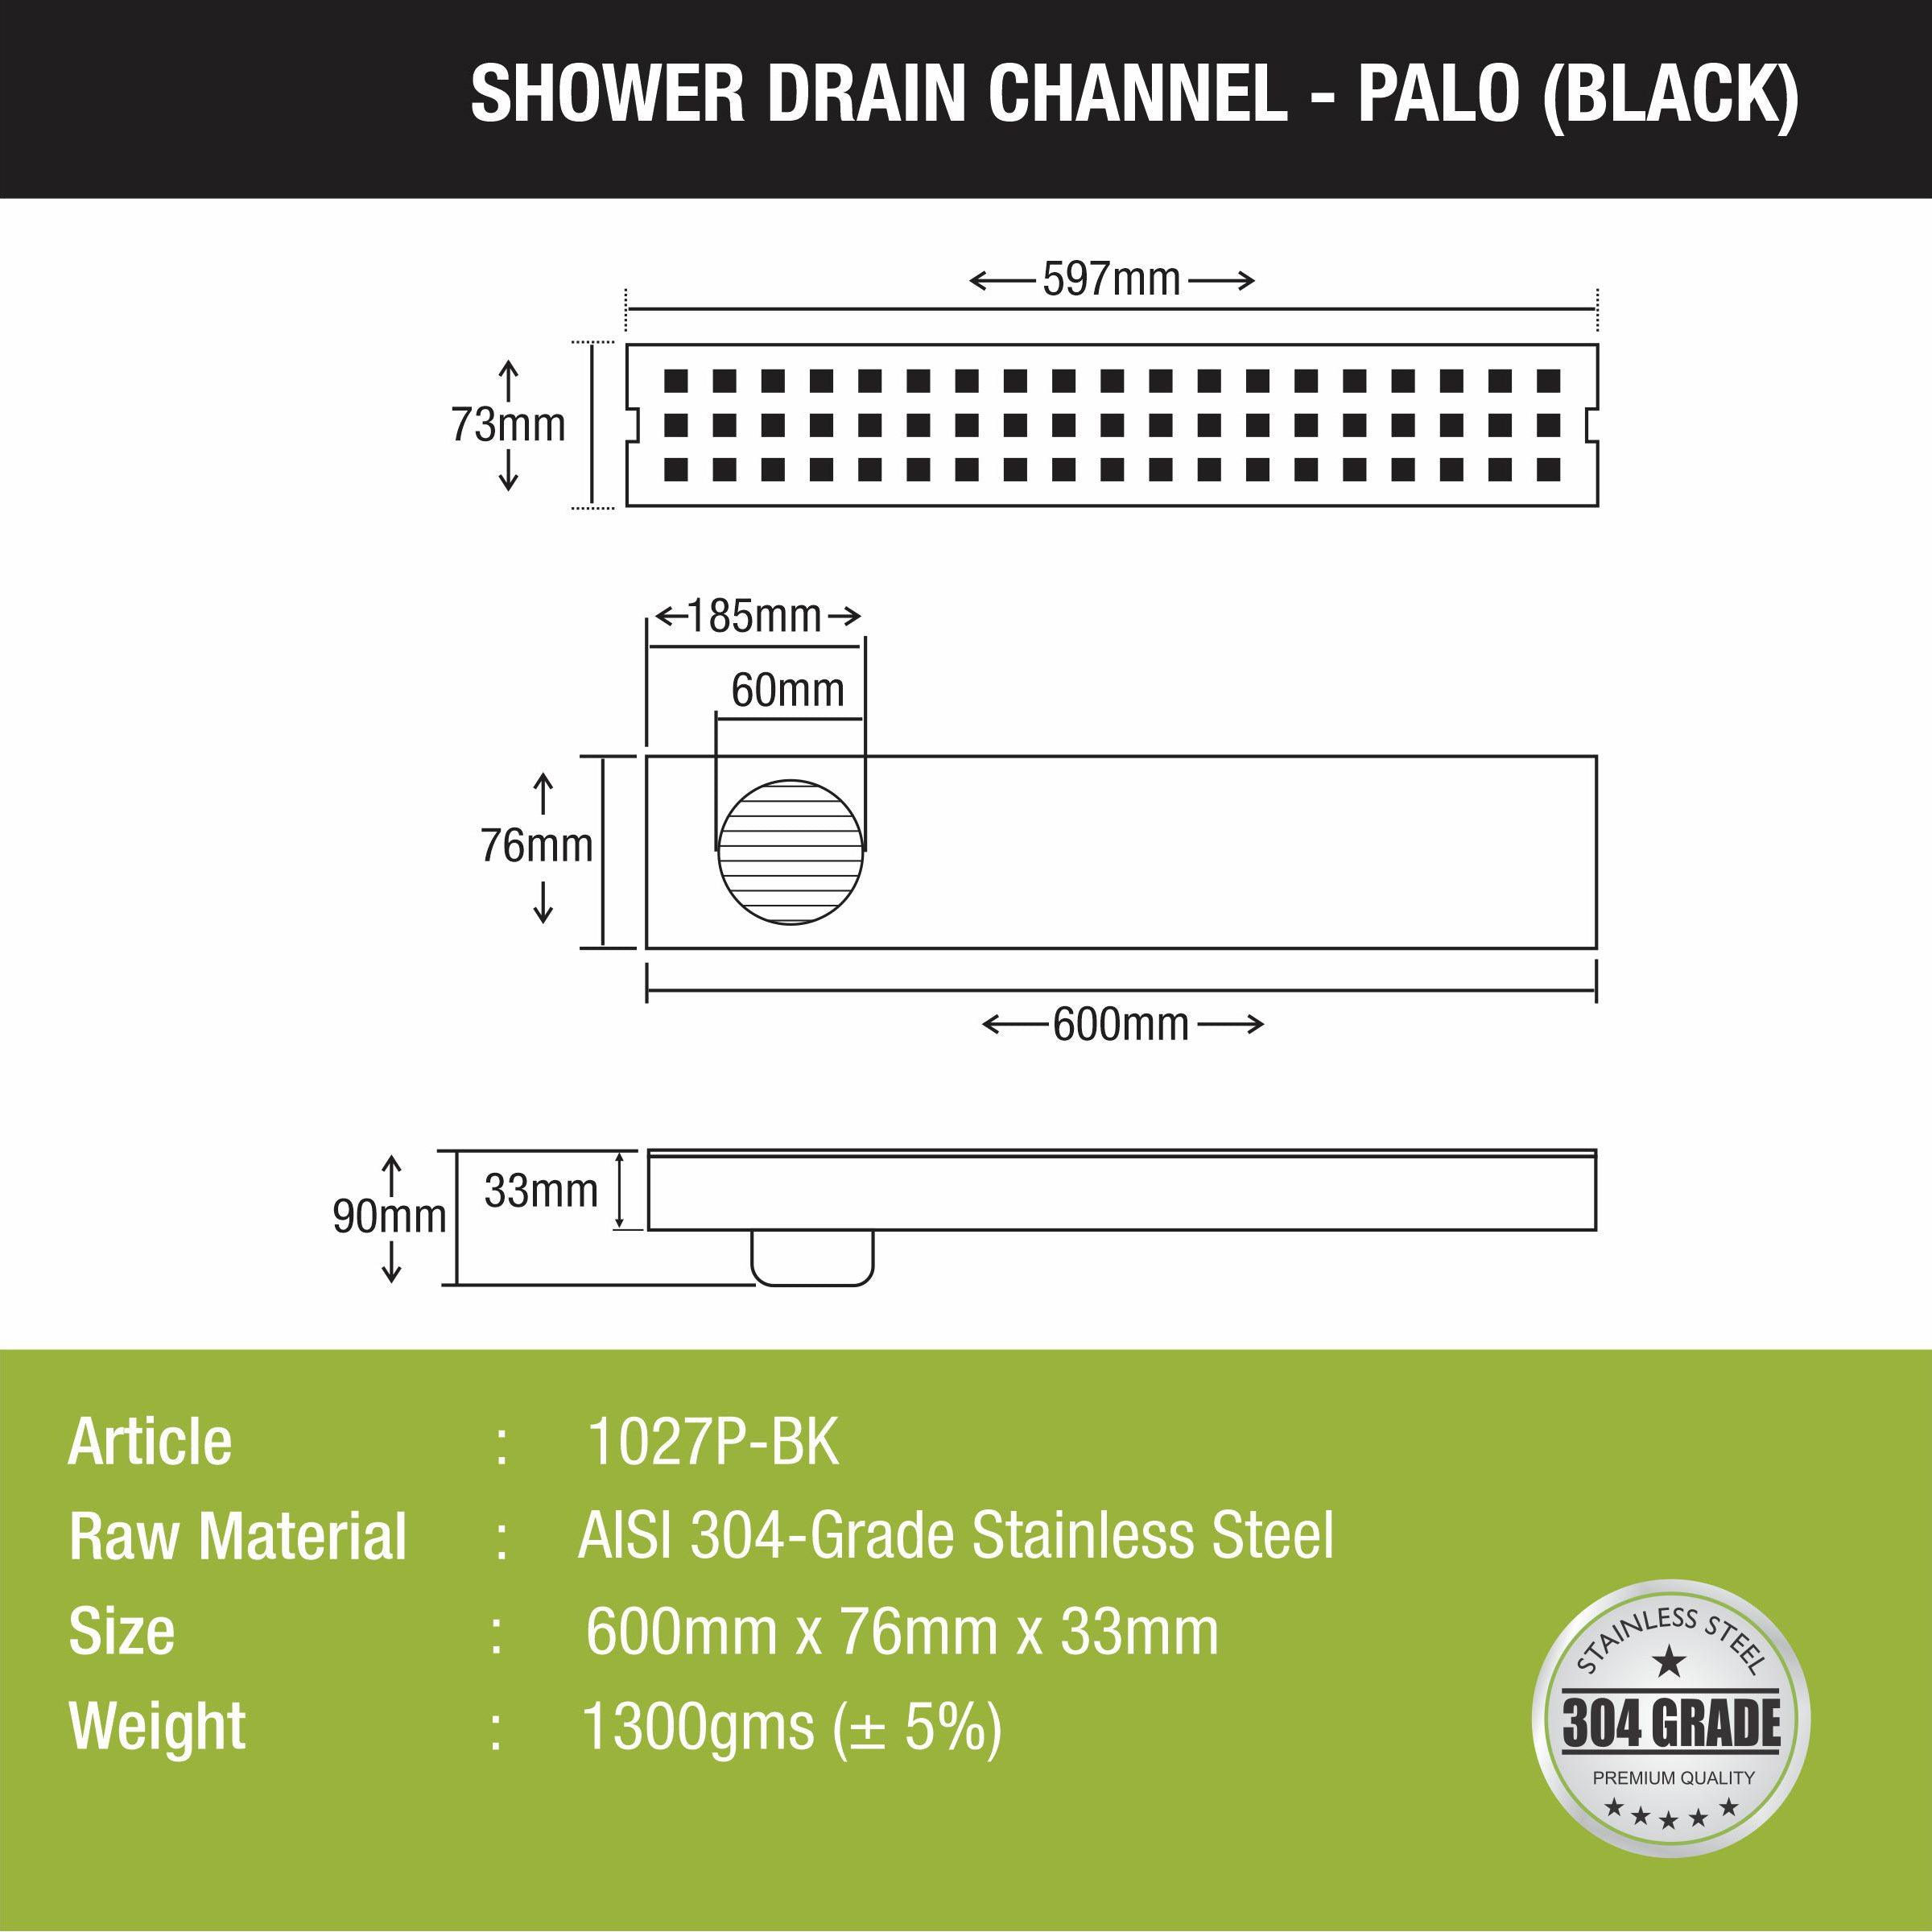 Palo Shower Drain Channel - Black (24 x 3 Inches) size and measurement'